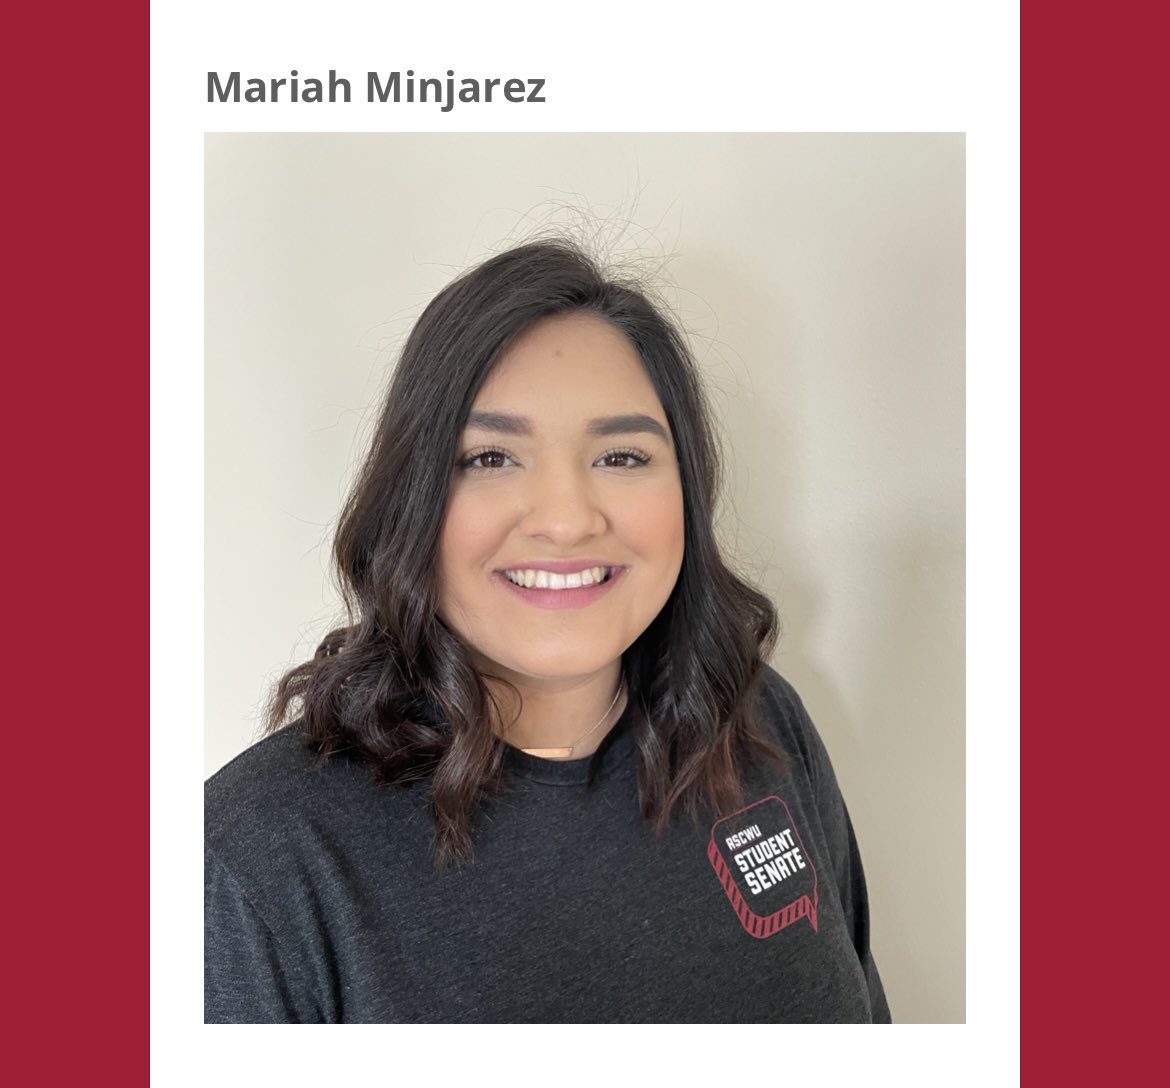 Senate Speaker: Rachael Medalia - 138 votes ASCWU Director for Equity & Multicultural Affairs: Mariah Minjarez - 5 out of 7 Equity and Service Council organizations voted